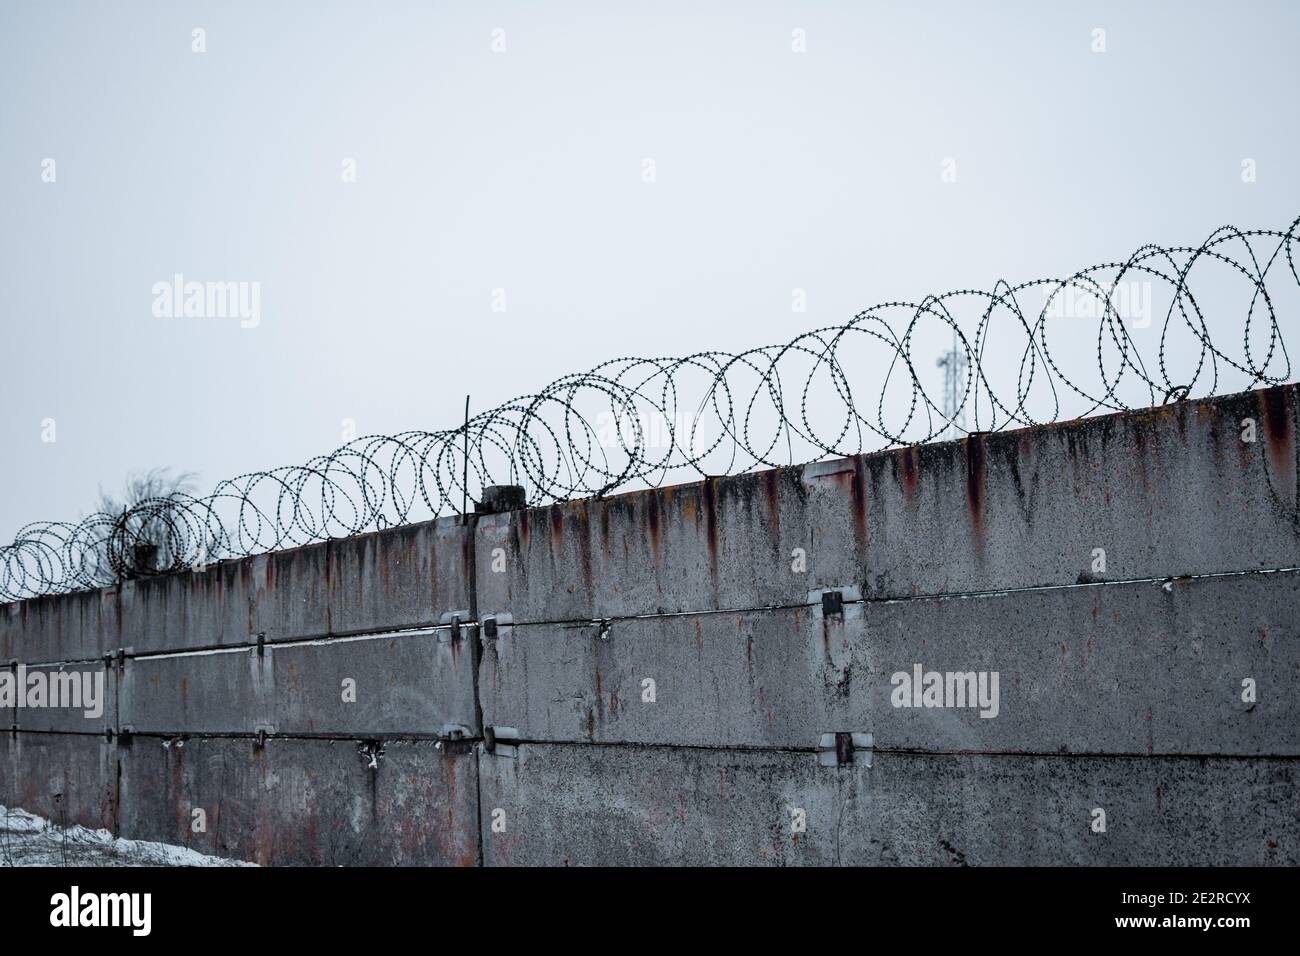 A concrete fence. Barbed wire. restricted area. Stock Photo